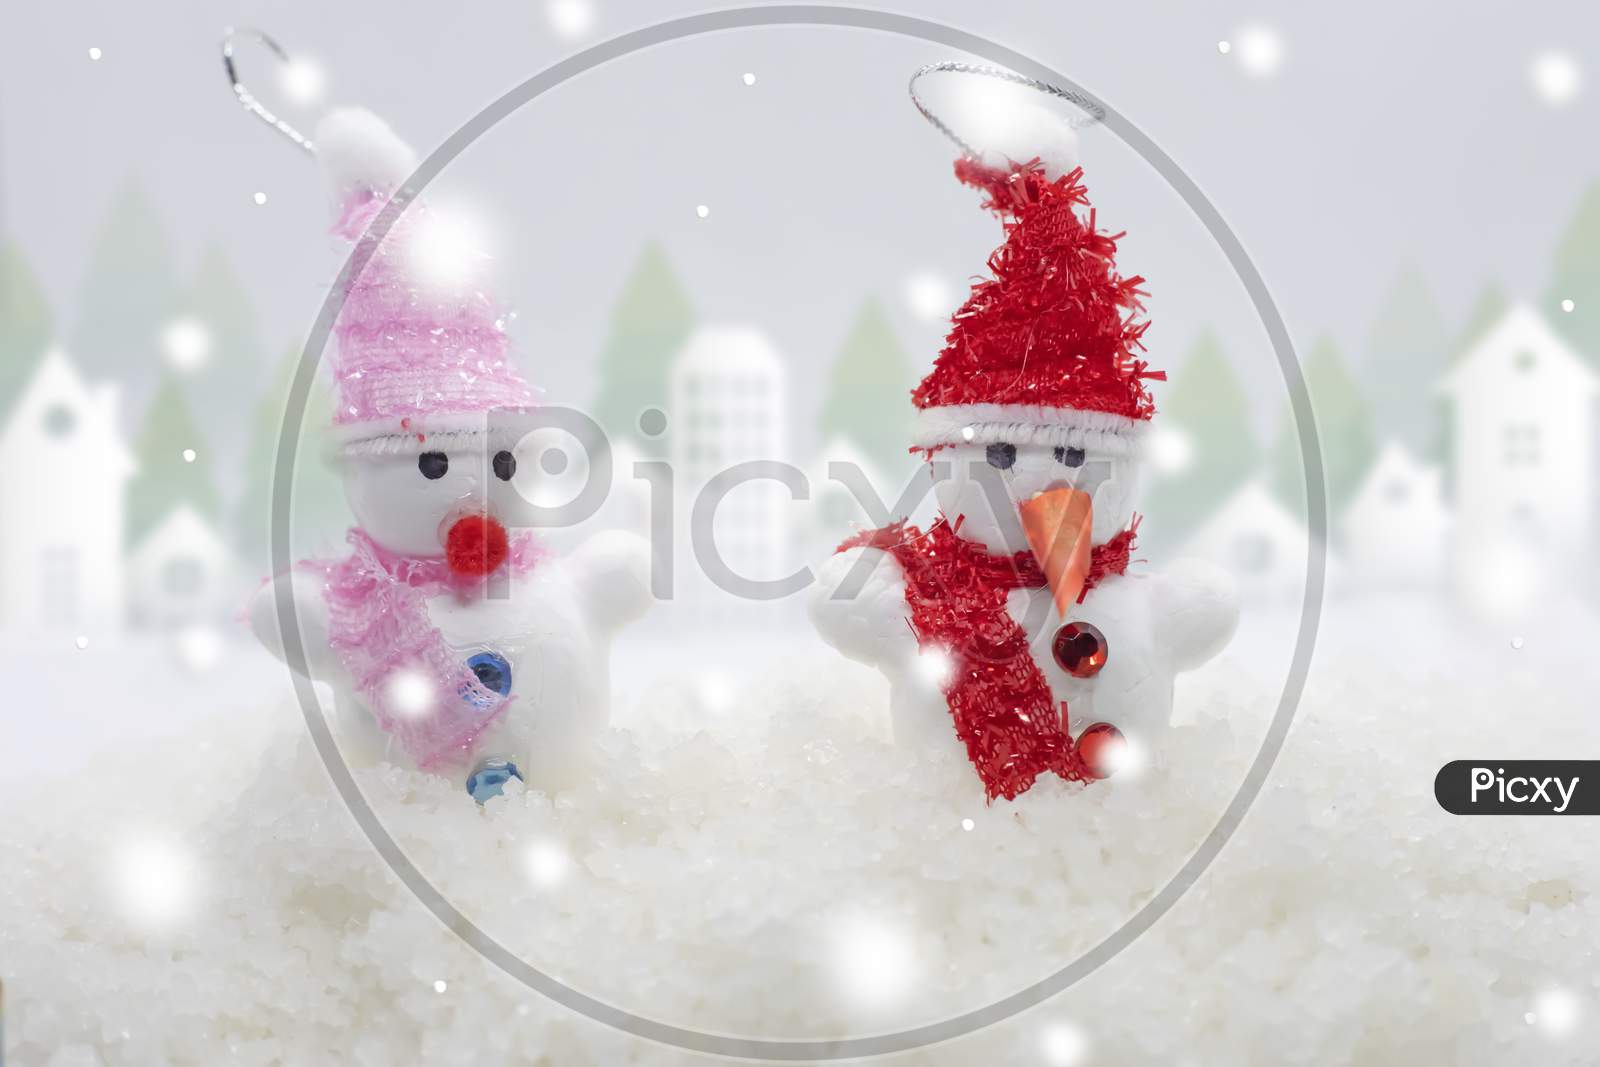 Merry Christmas And Happy New Year Greeting Card .Two Cheerful Snowman Standing In Winter Christmas Landscape.